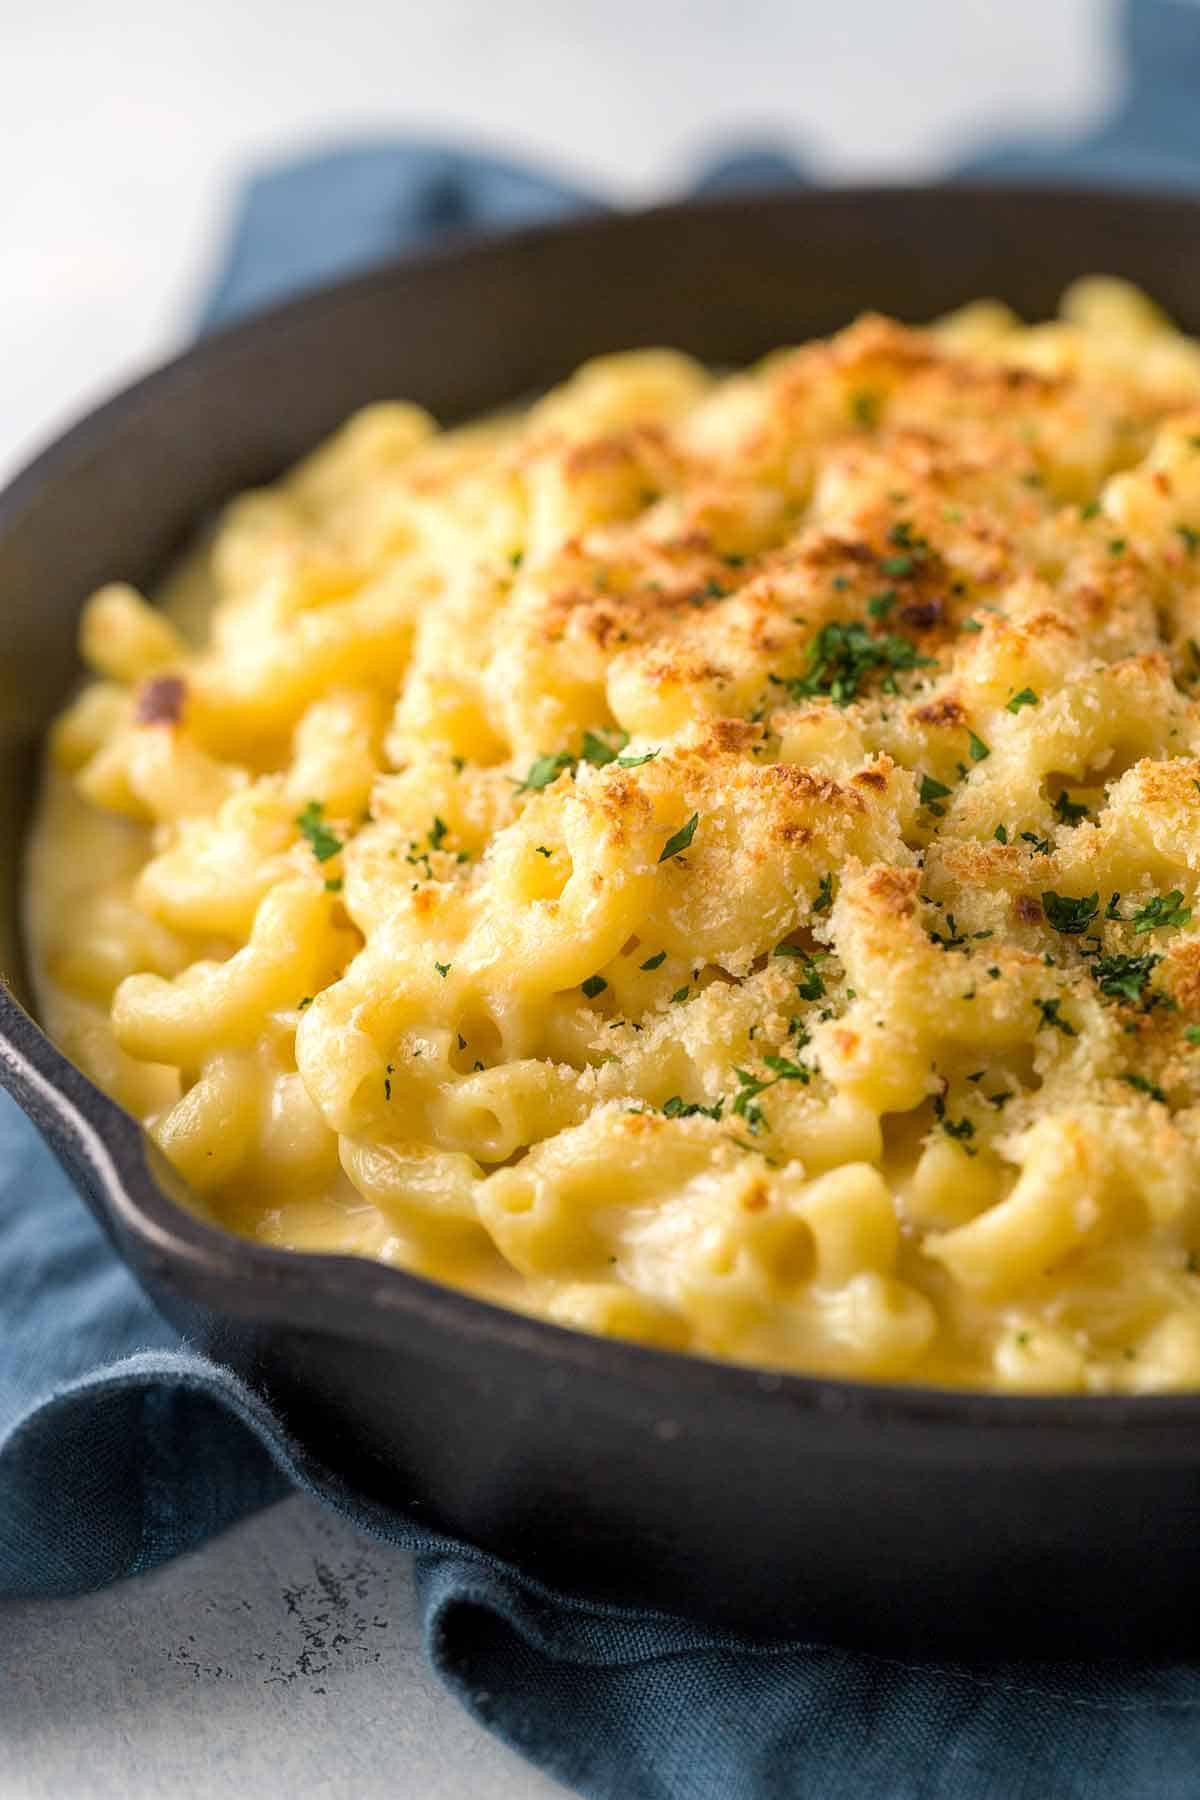 Baked Homemade Macaroni And Cheese
 Baked Macaroni and Cheese with Bread Crumb Topping